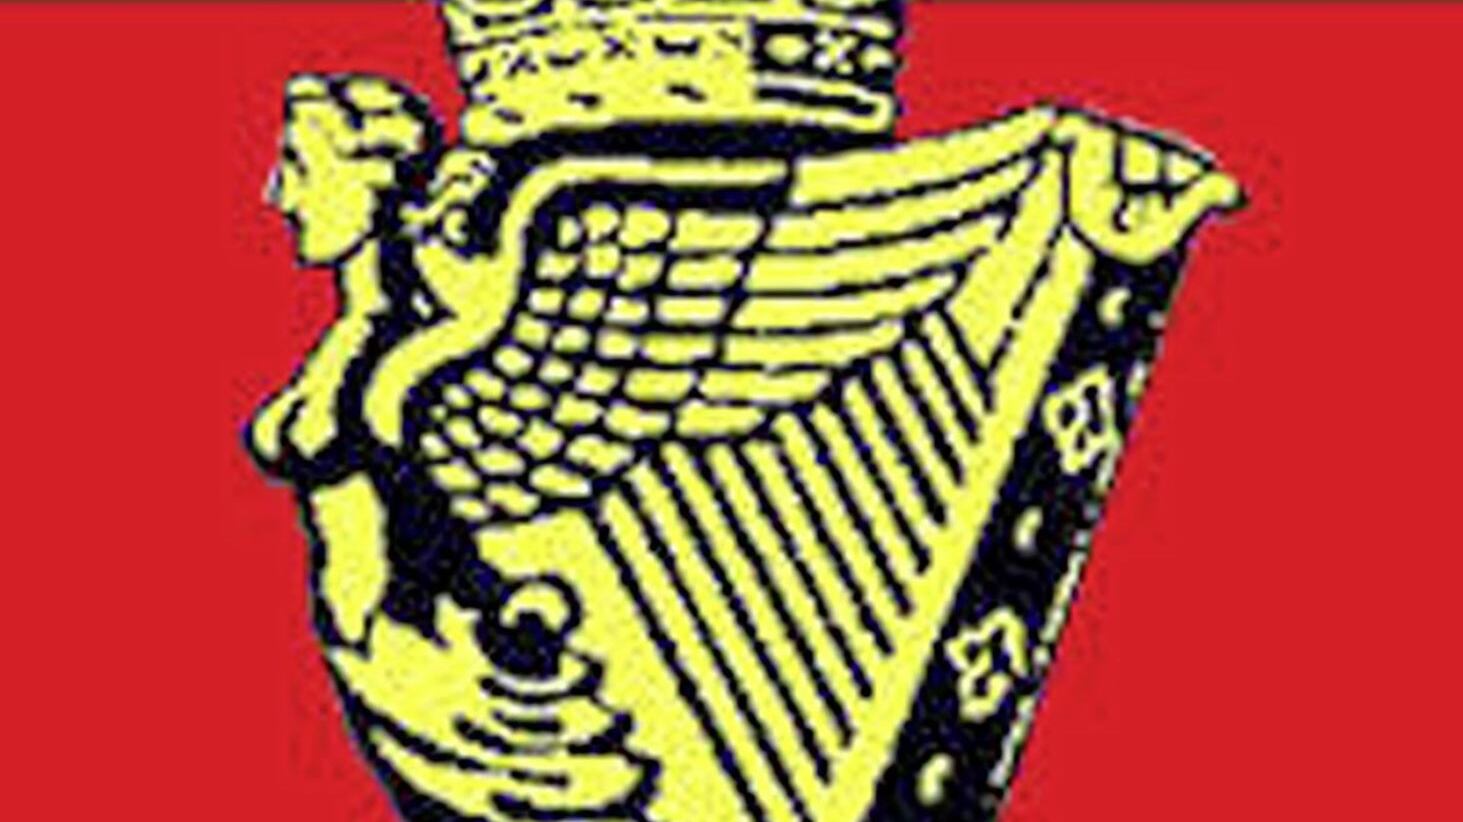 The UDR was merged with the Royal Irish Rangers to form the Royal Irish Regiment in 1992 